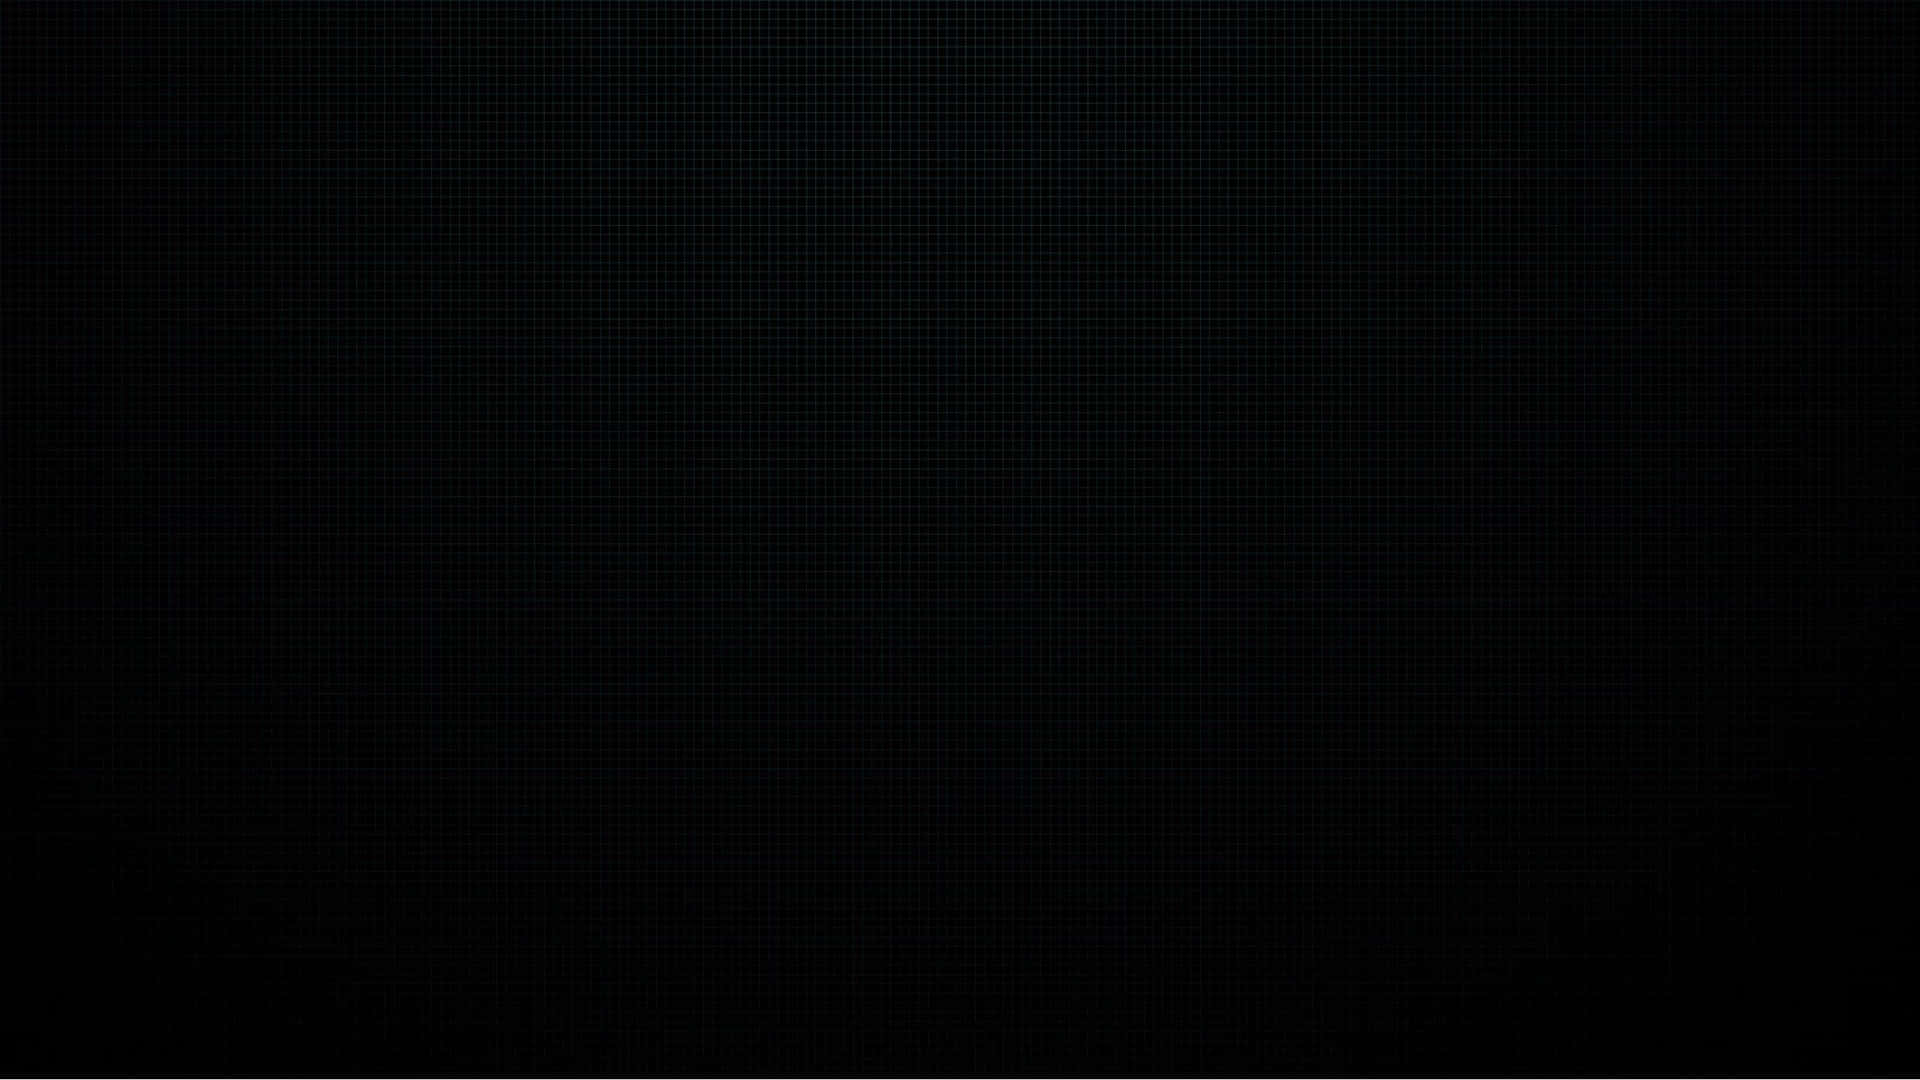 a black background with a white square